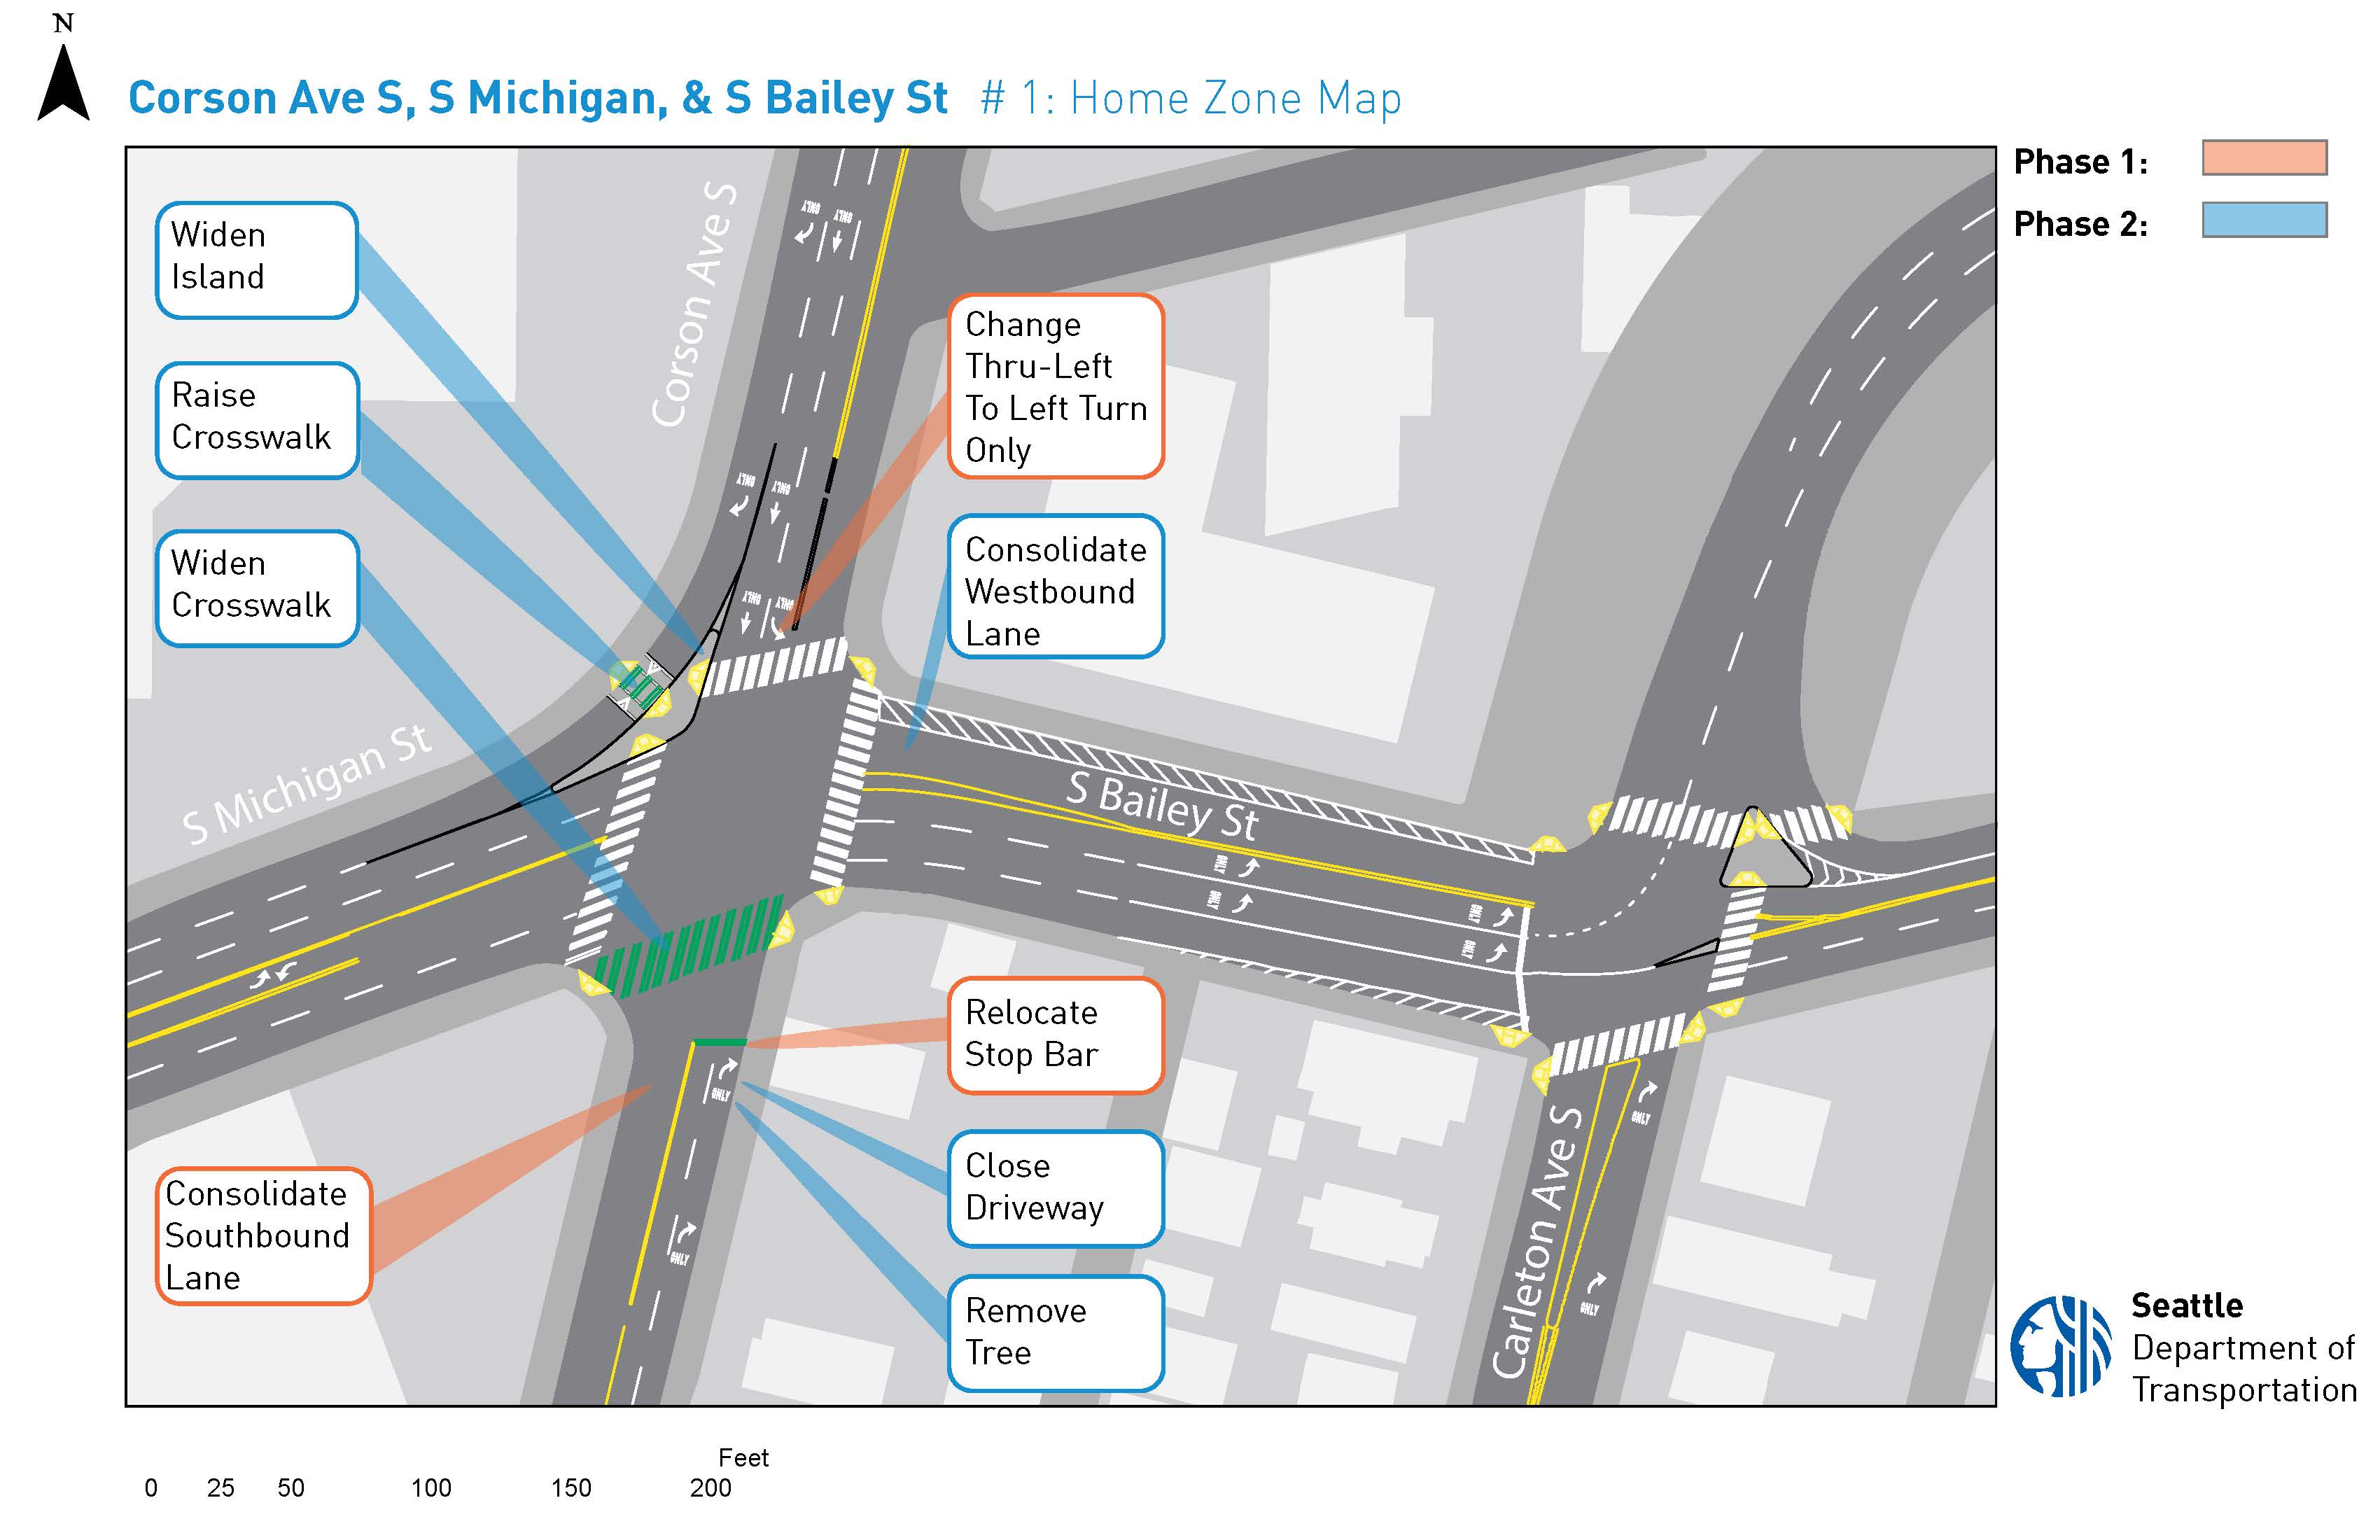 Map of Corson Ave S, S Michigan, and S Bailey Street Home Zone with phases.